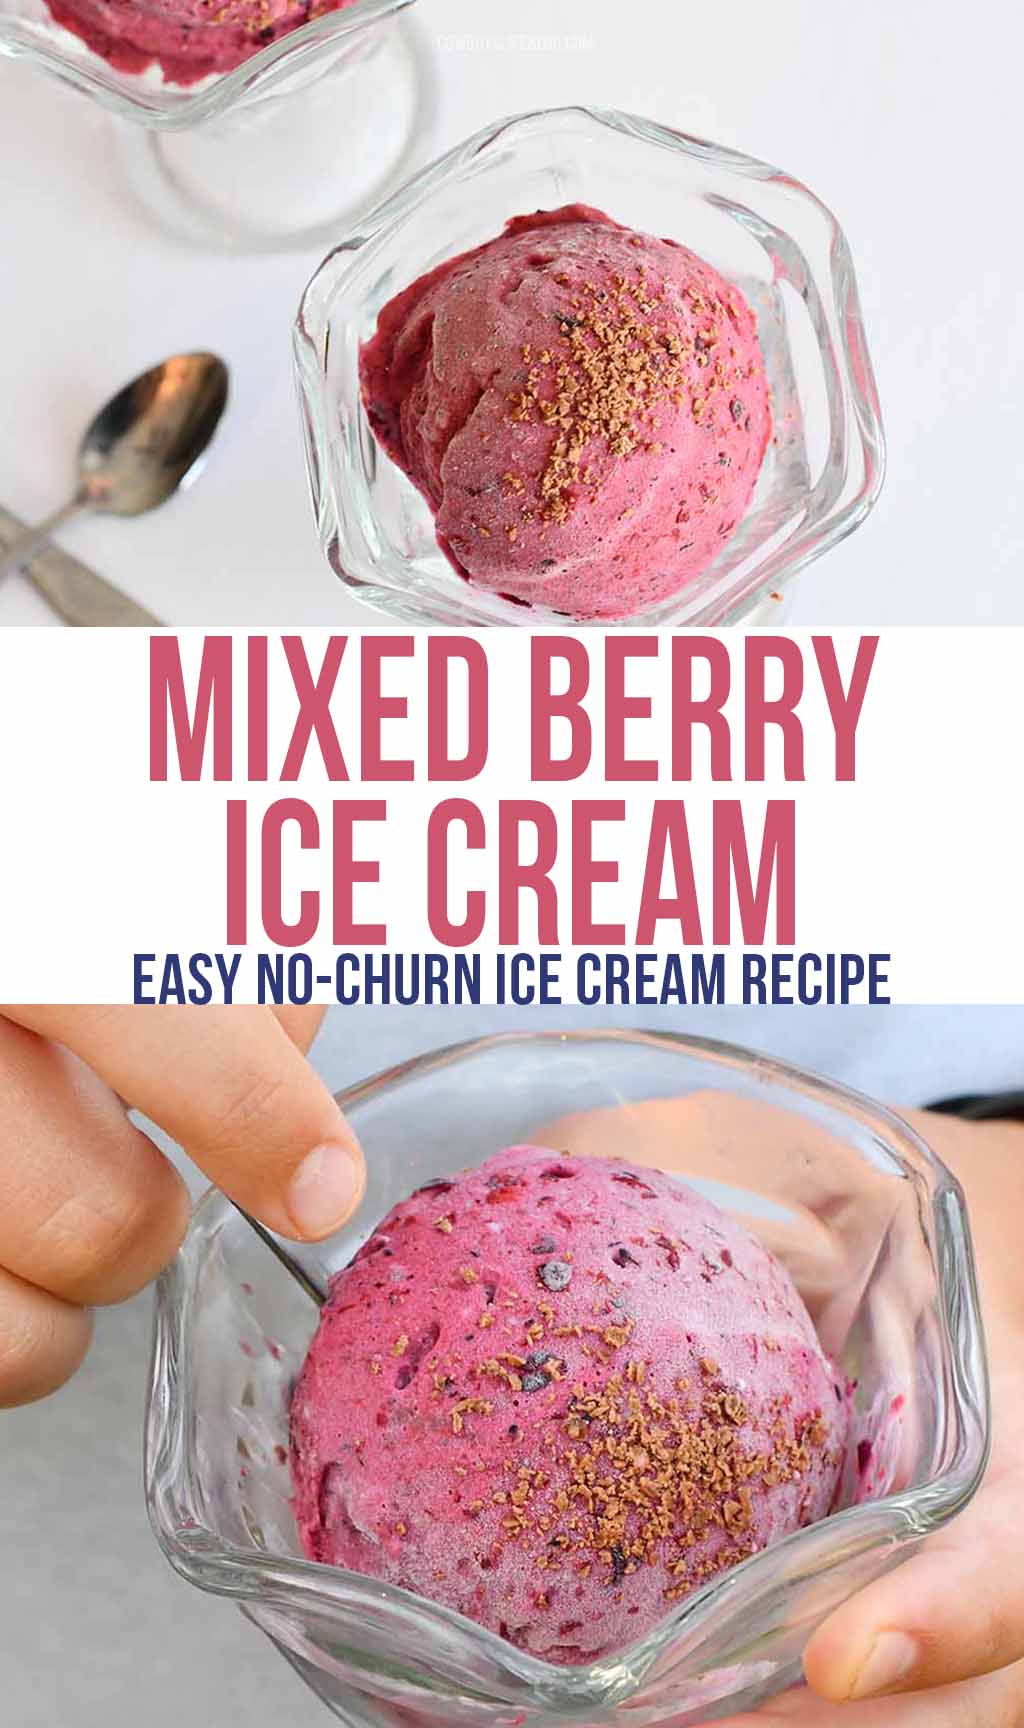 Mixed berry ice cream topping with chocolate shavings in a glass bowl